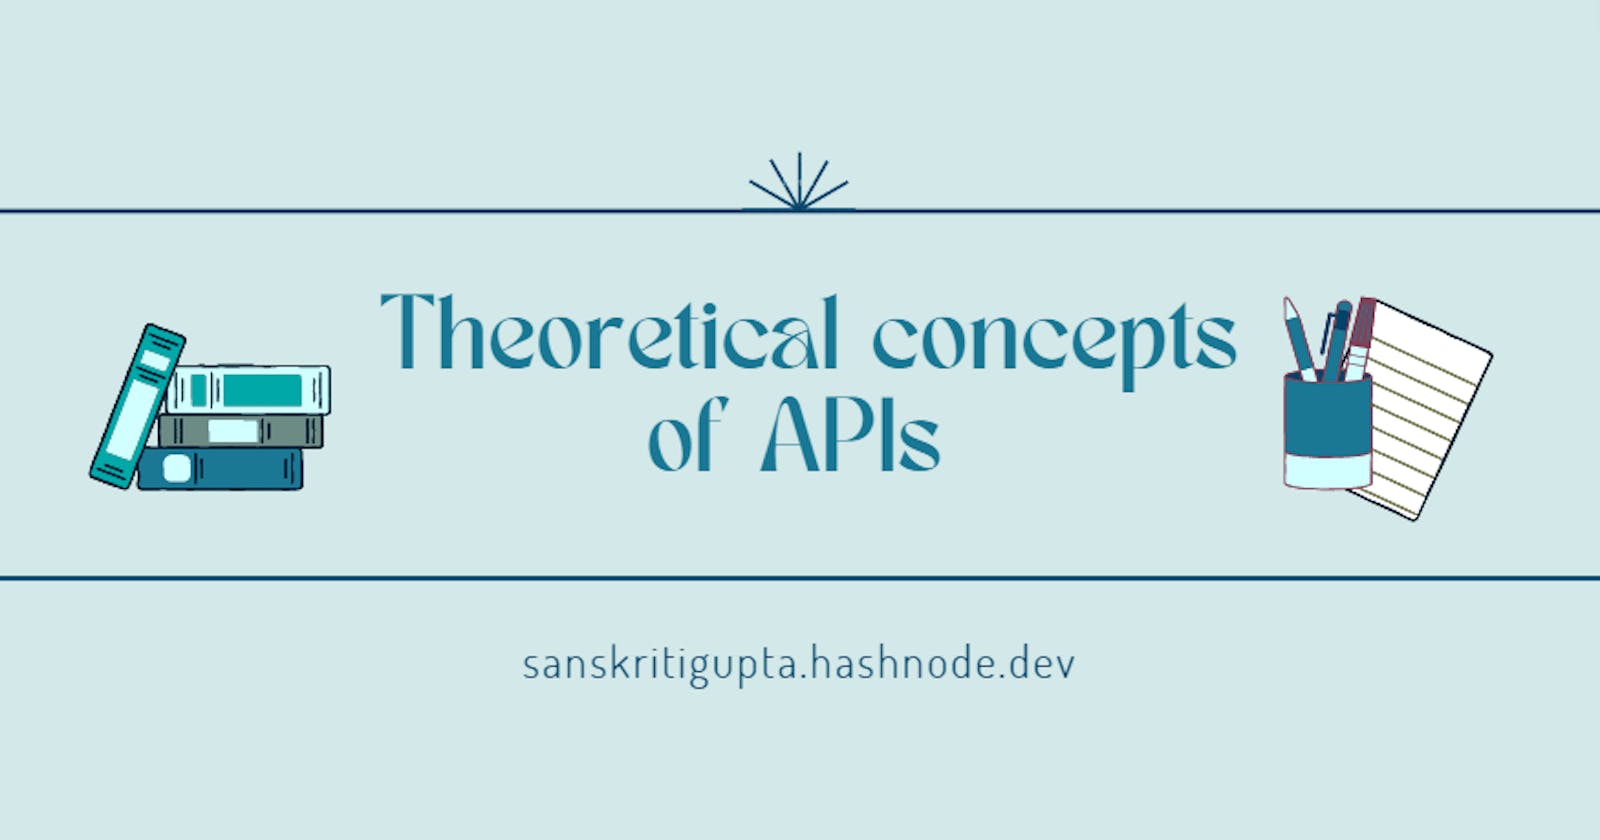 Theoretical concepts of APIs